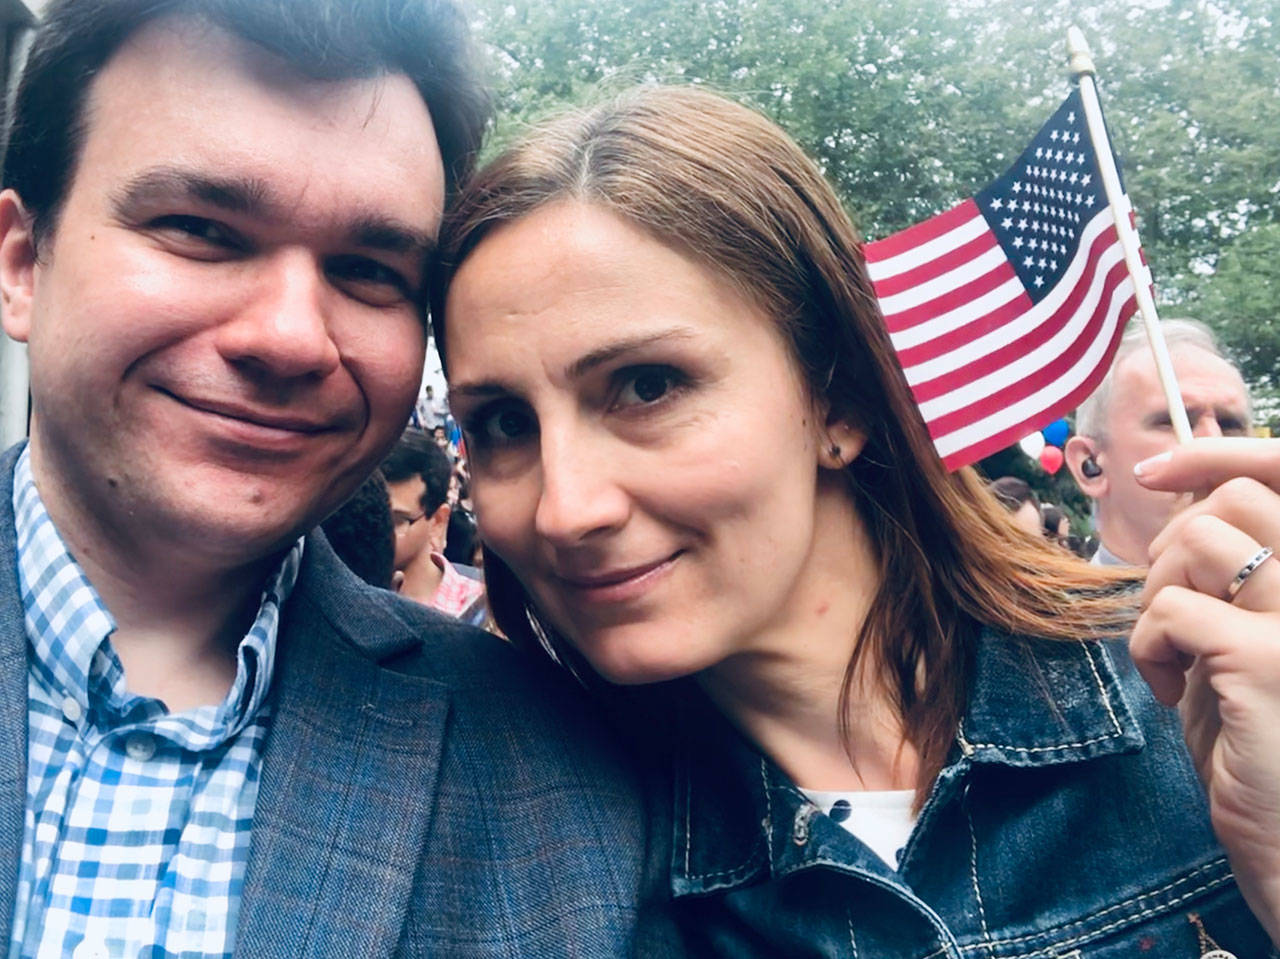 Photo courtesy of Ksenia Khokhlov                                Ksenia Khokhlov (left) and her husband Anton Khokhlov are all smiles as they wait to be sworn in as U.S. citizens at the ceremony on July 4 at Seattle Center.